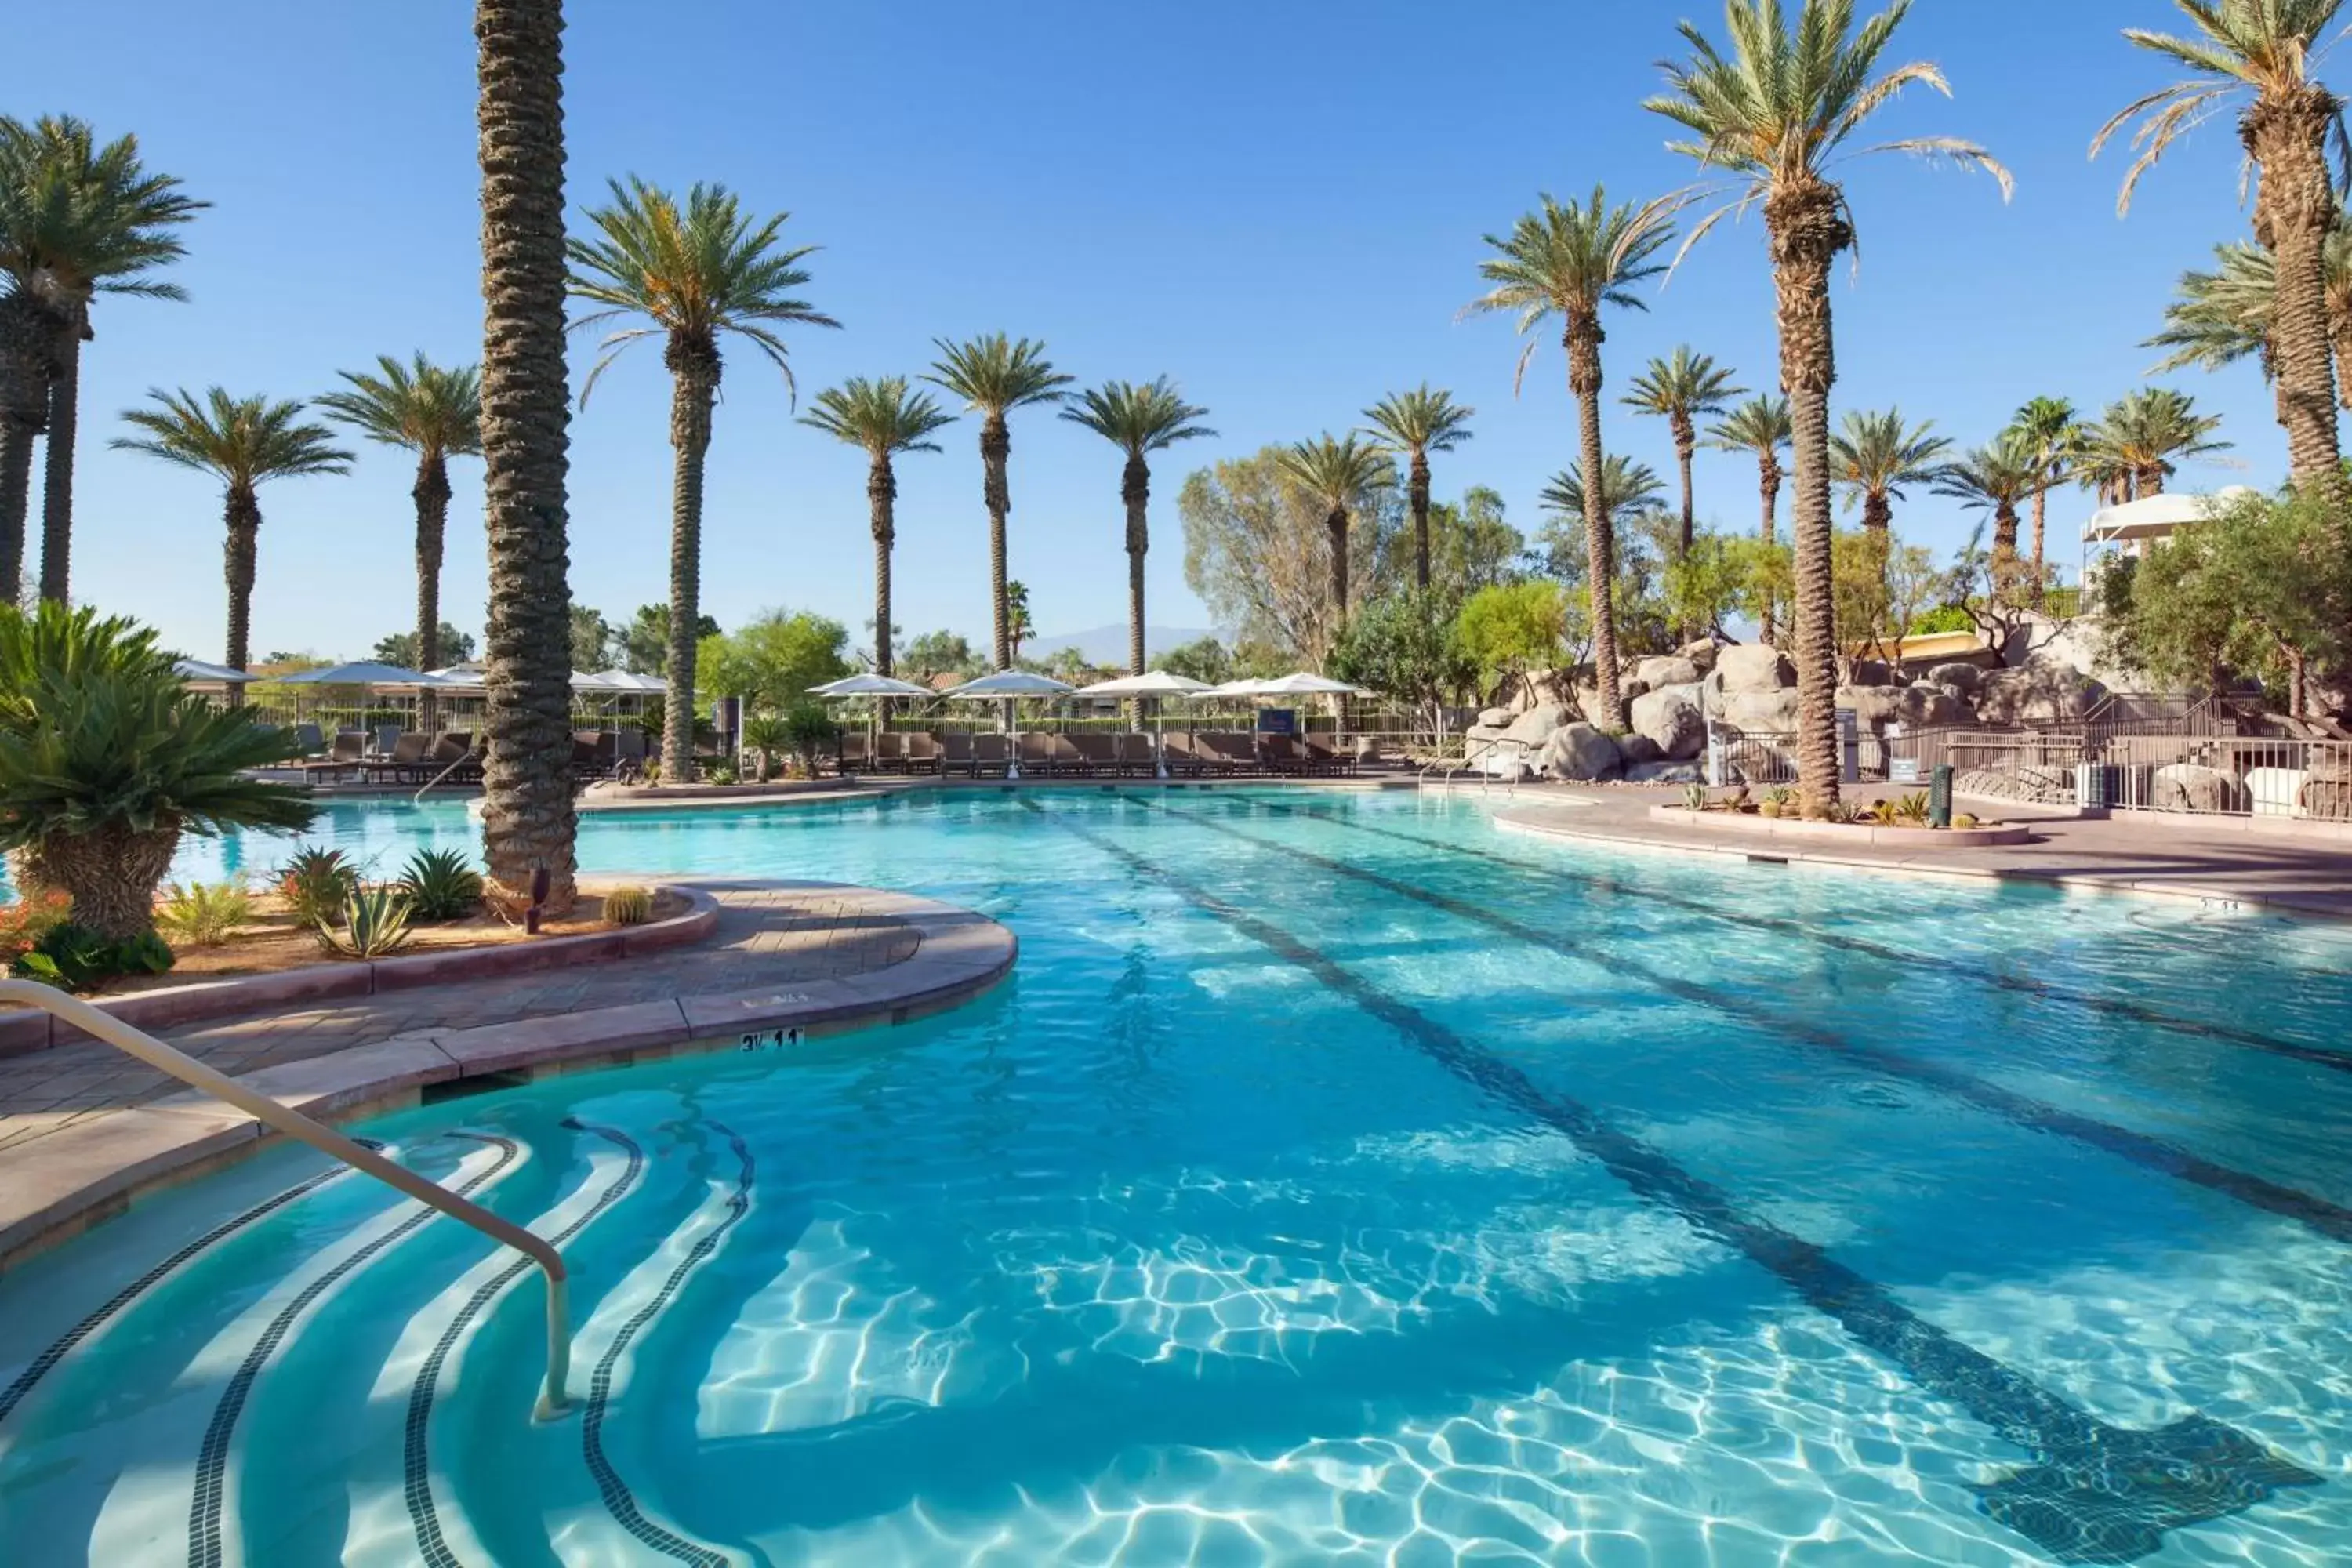 Swimming Pool in The Westin Mission Hills Resort Villas, Palm Springs